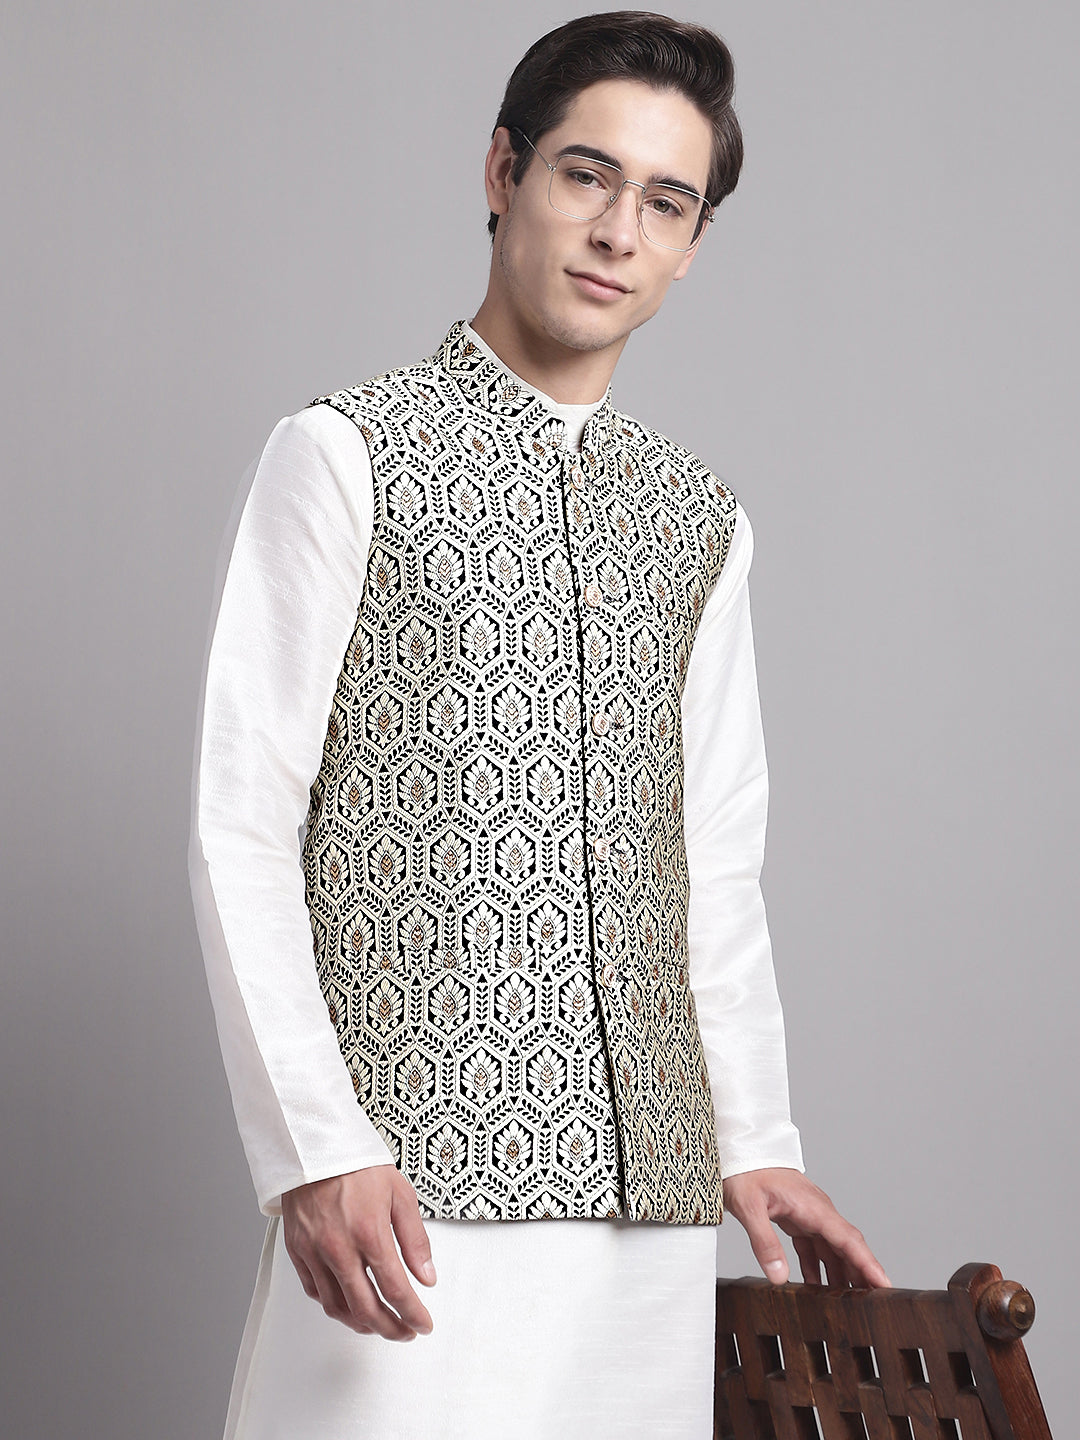 Buy BUAGI COLLECTION Men's ethnic wear jackets, SILVER color nehru jackets  , Waisecoat, Modi koti with perfect design (M) at Amazon.in